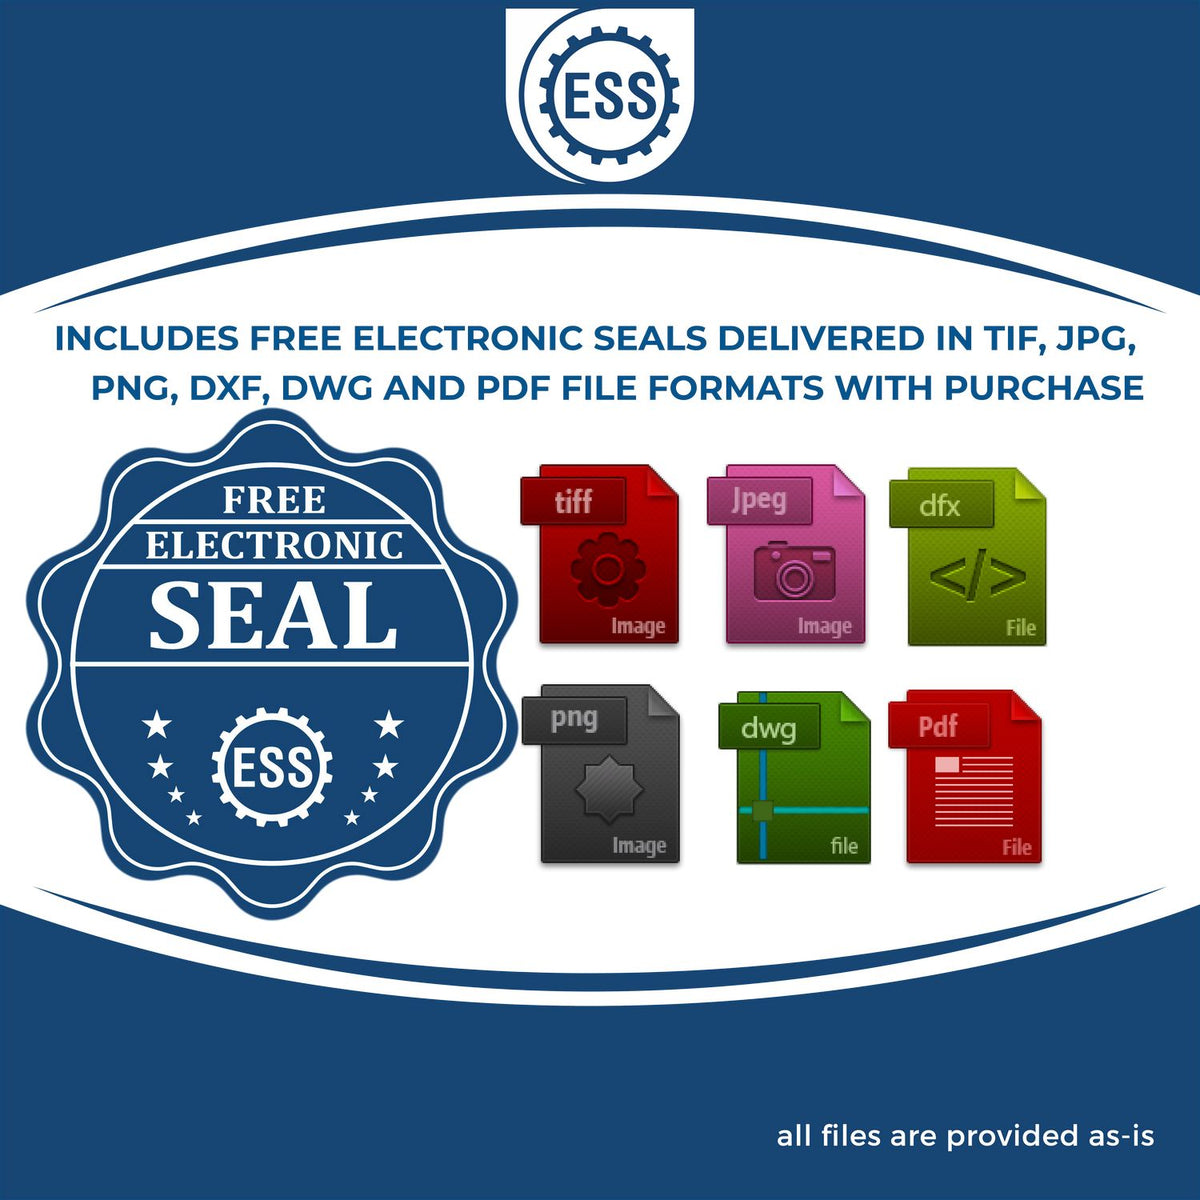 An infographic for the free electronic seal for the Heavy Duty Cast Iron Indiana Engineer Seal Embosser illustrating the different file type icons such as DXF, DWG, TIF, JPG and PNG.